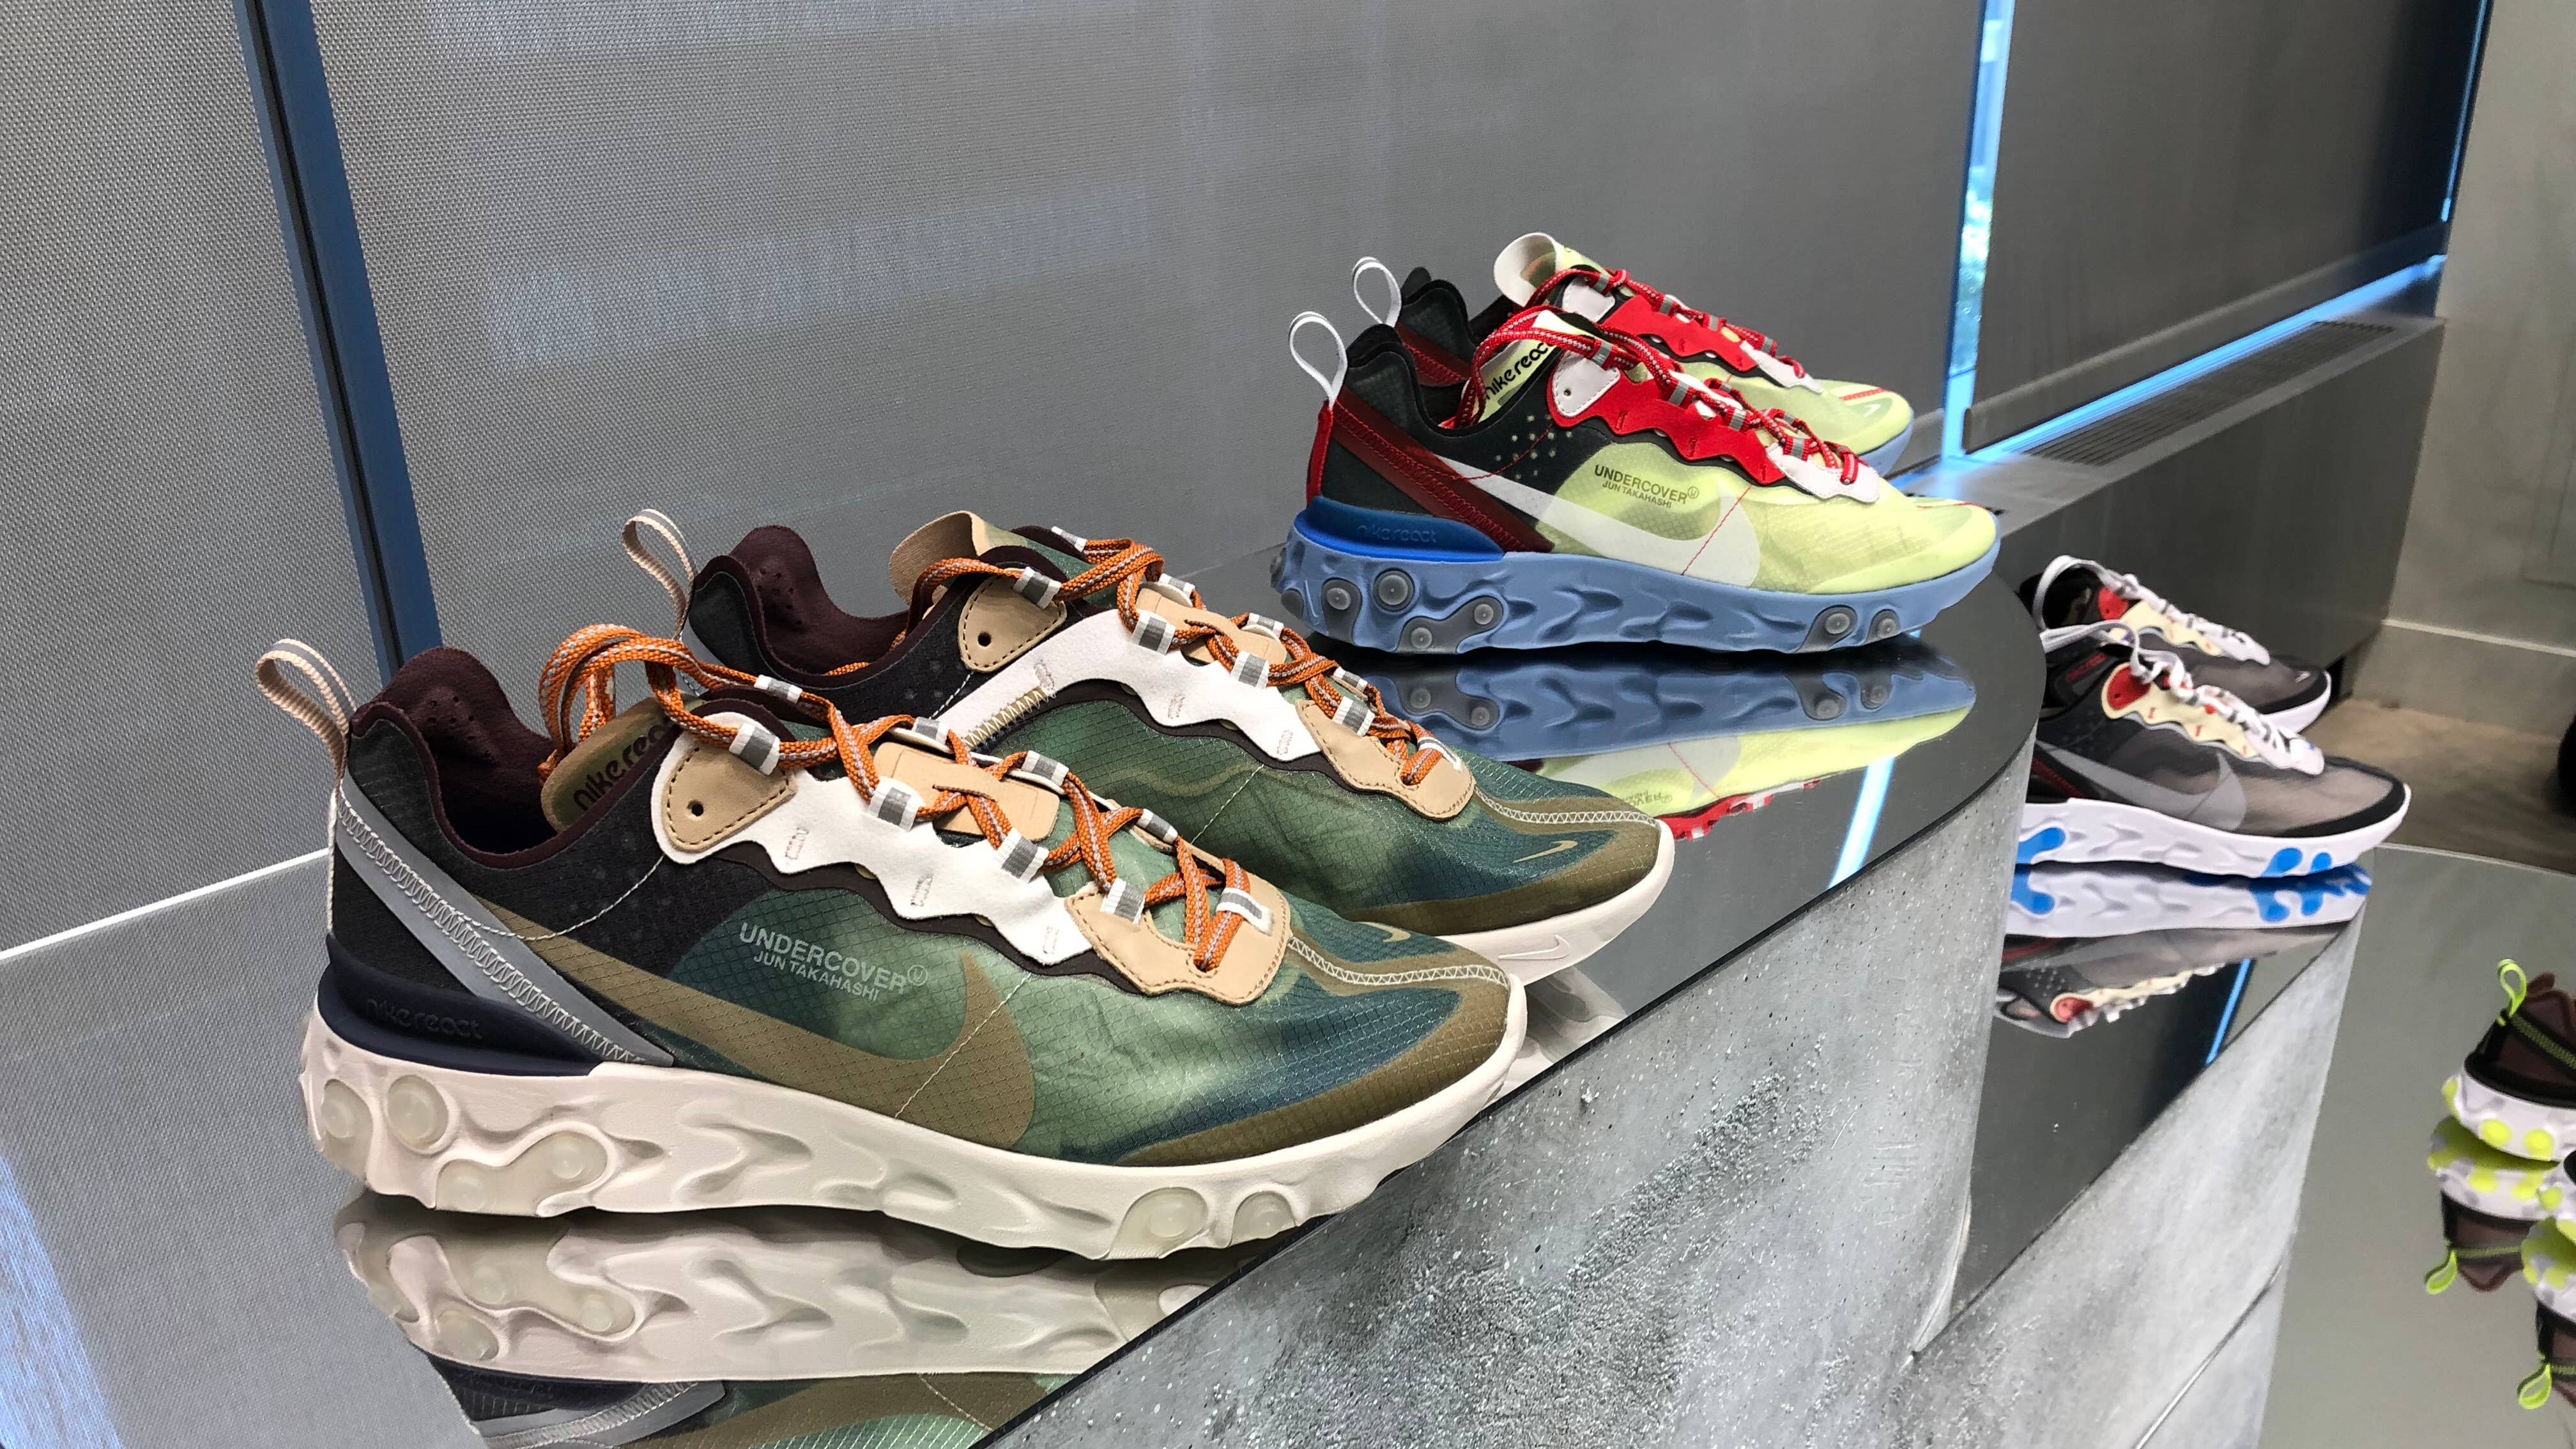 Look at Two More Pairs of Undercover's React Element 87s |